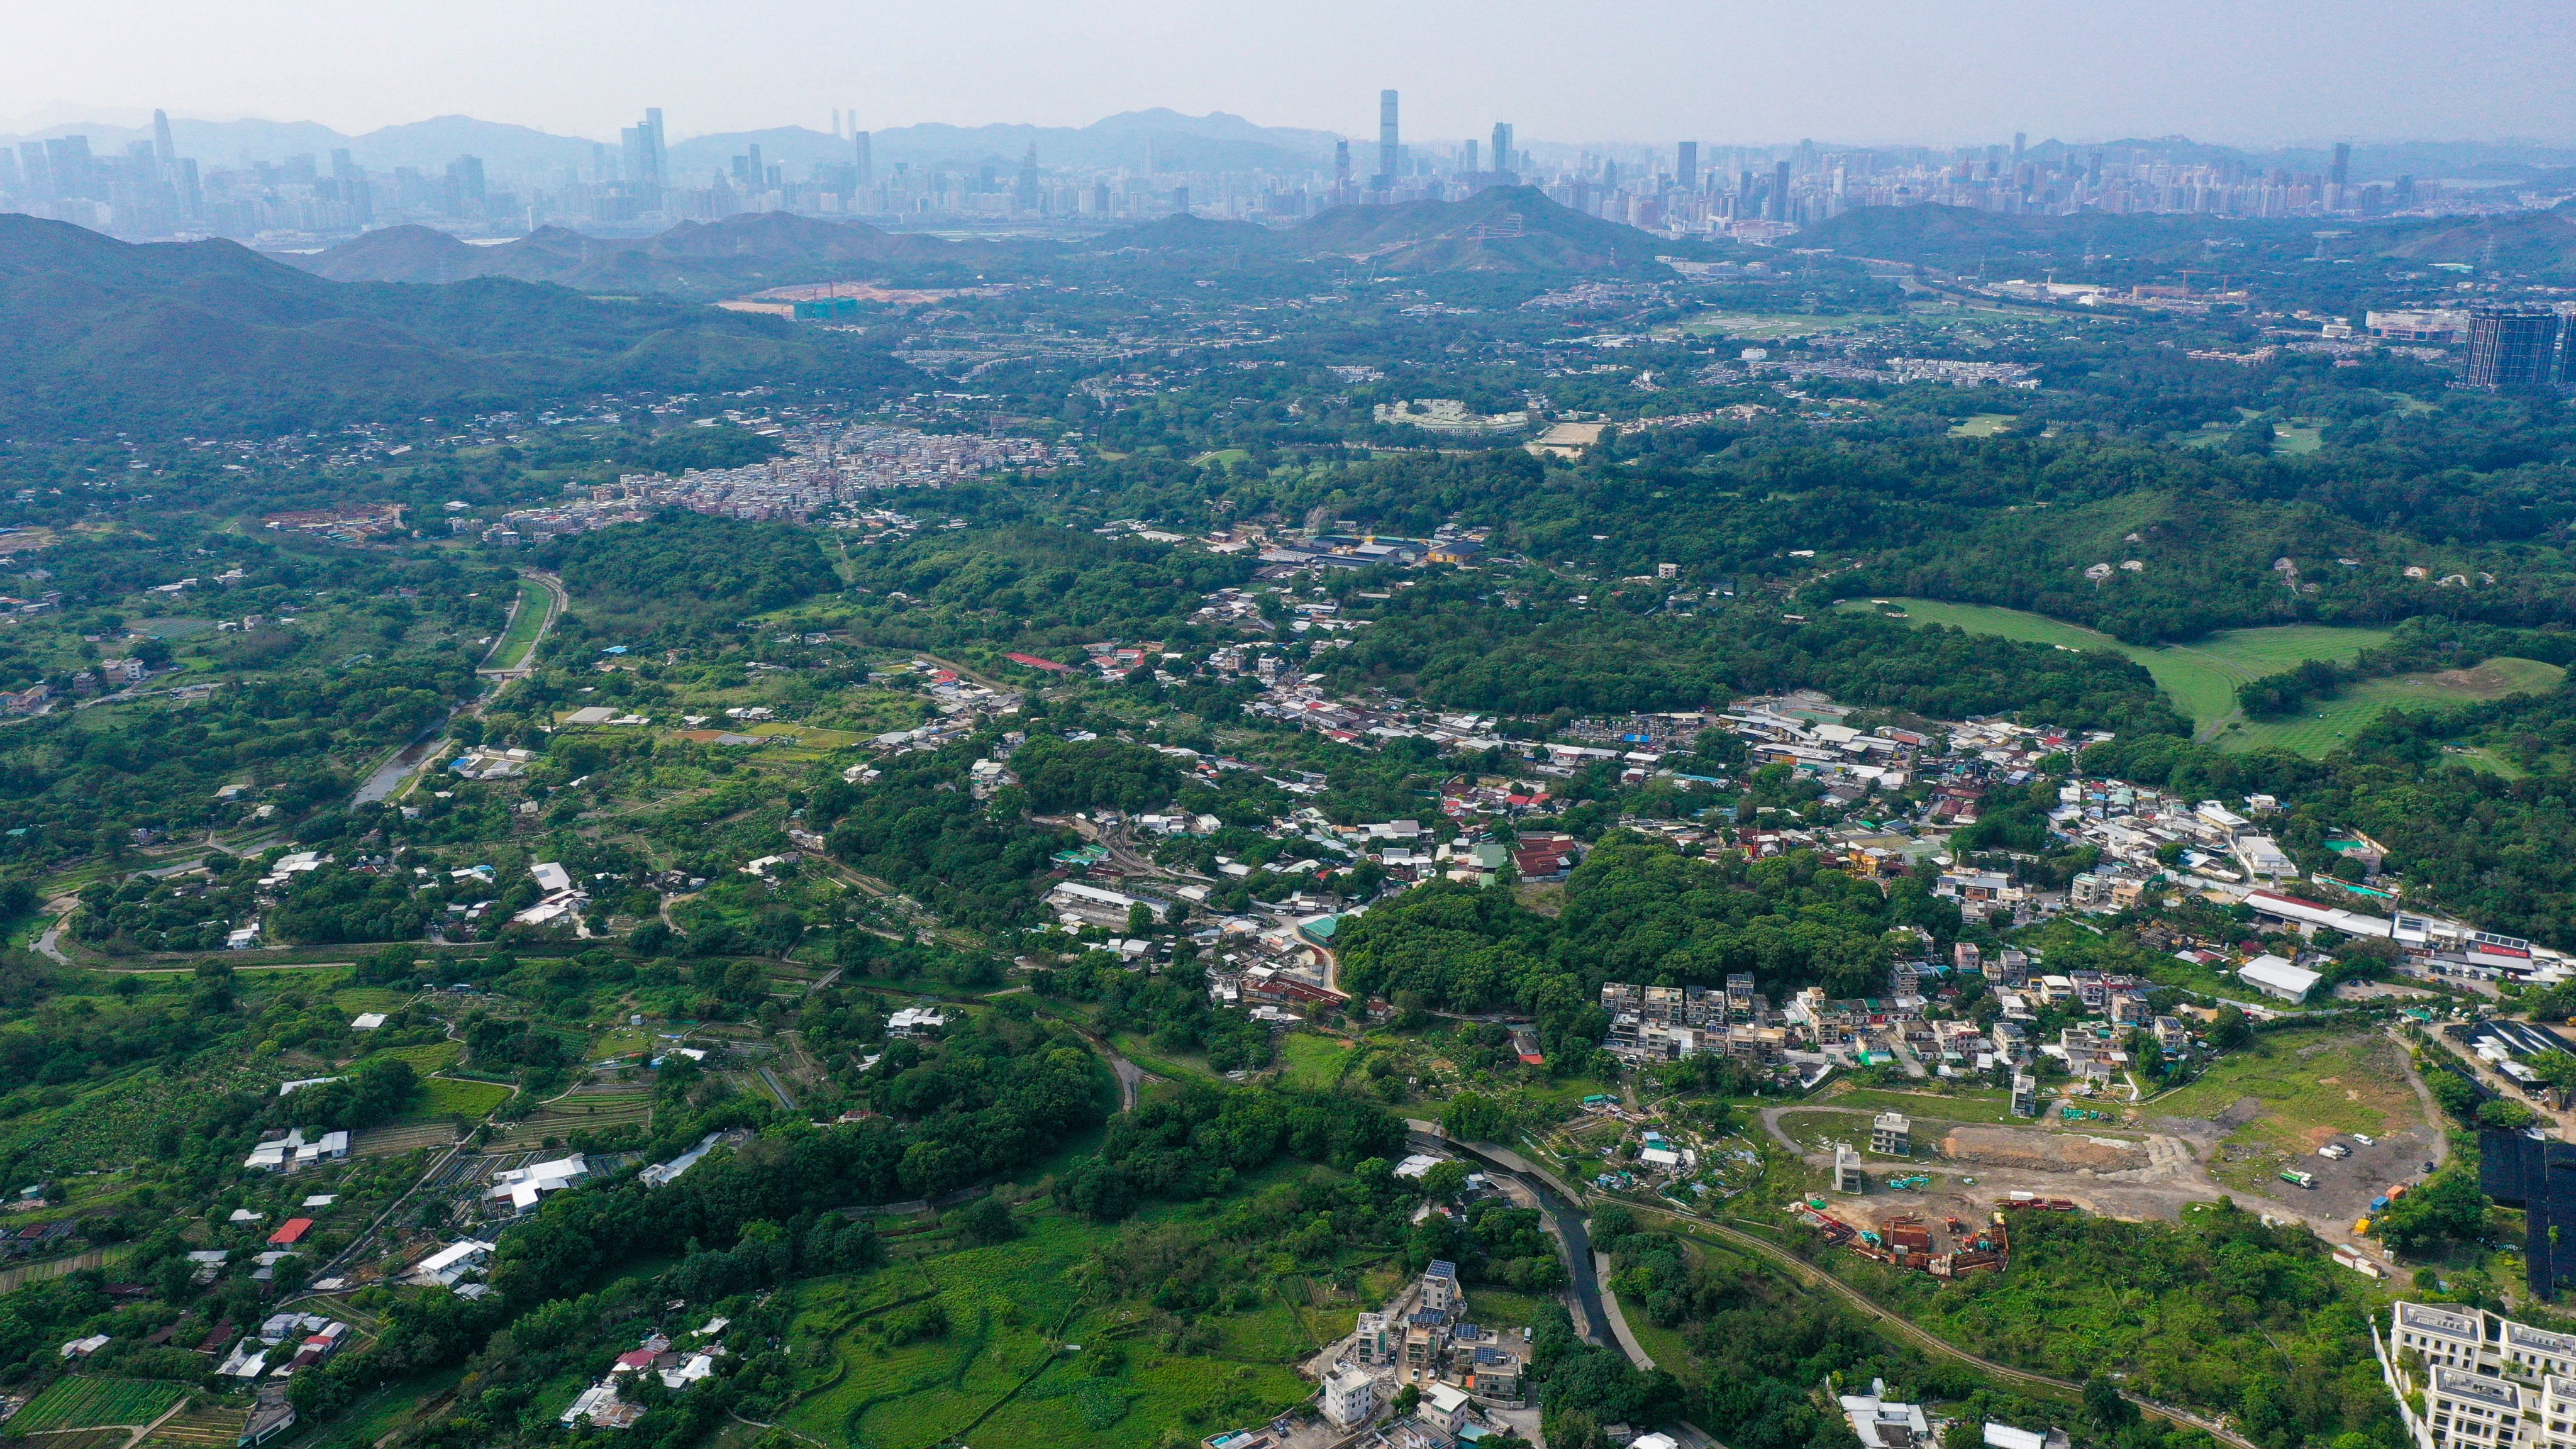 The Kwu Tung area in the New Territories. The Northern Metropolis project along the border with Shenzhen has been highlighted by Hong Kong’s finance chief as a target for investment from Gulf states. Photo: May Tse